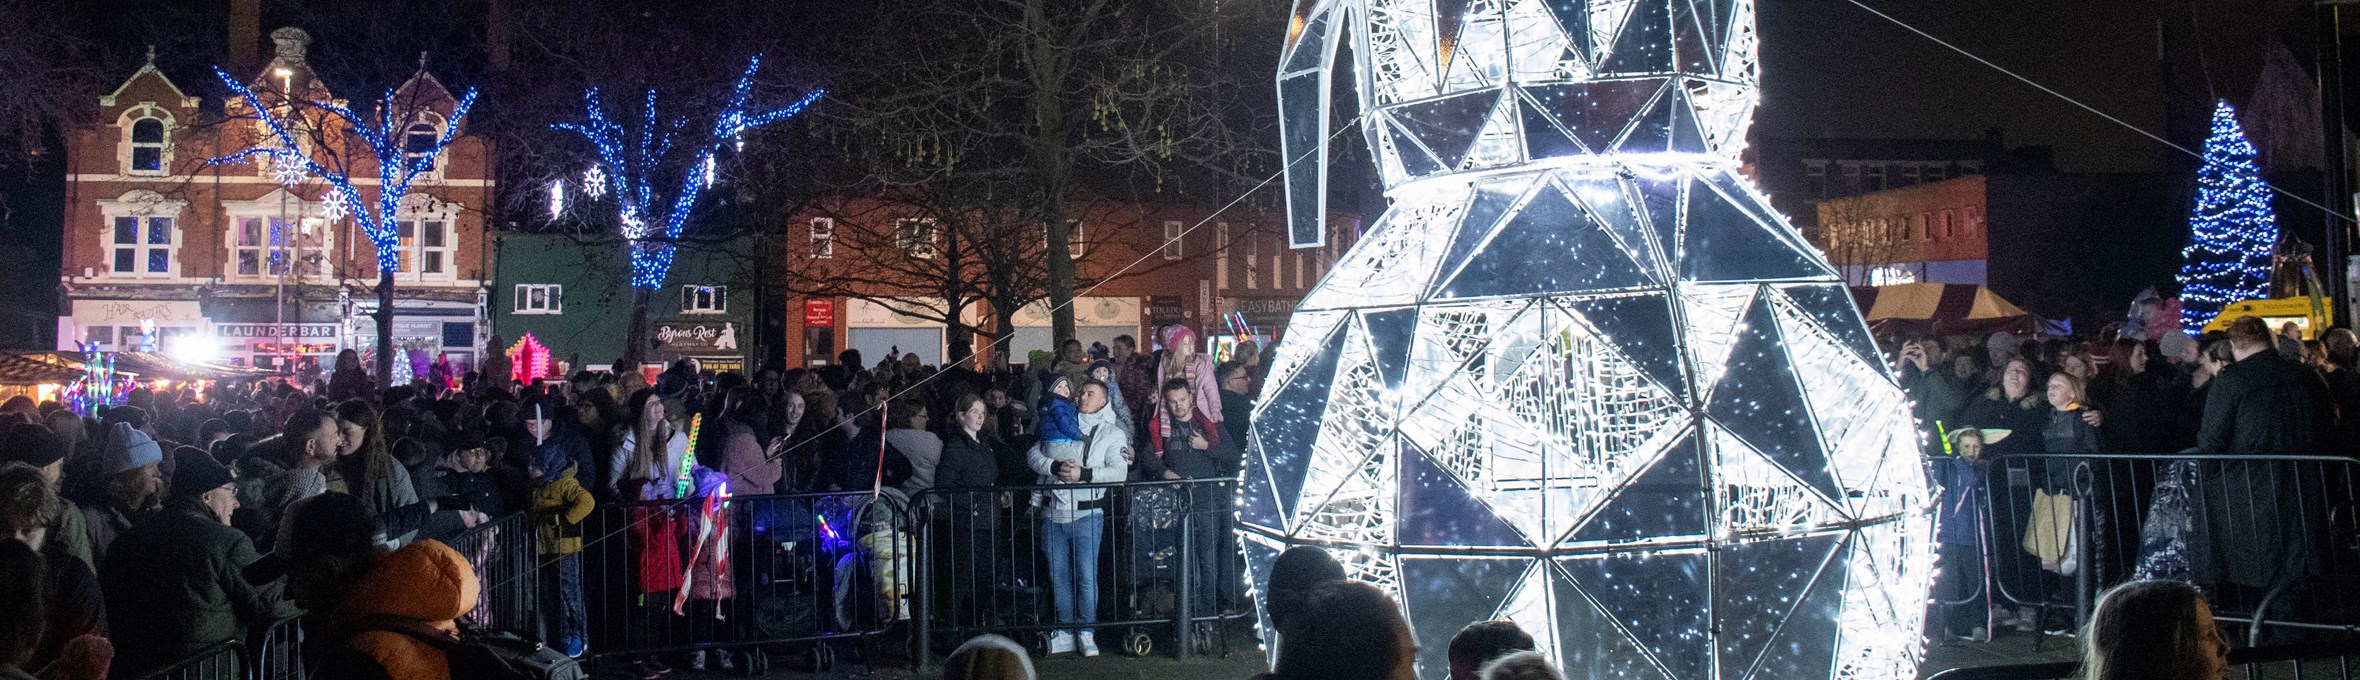 Crowds gathered around a giant LED snowman 